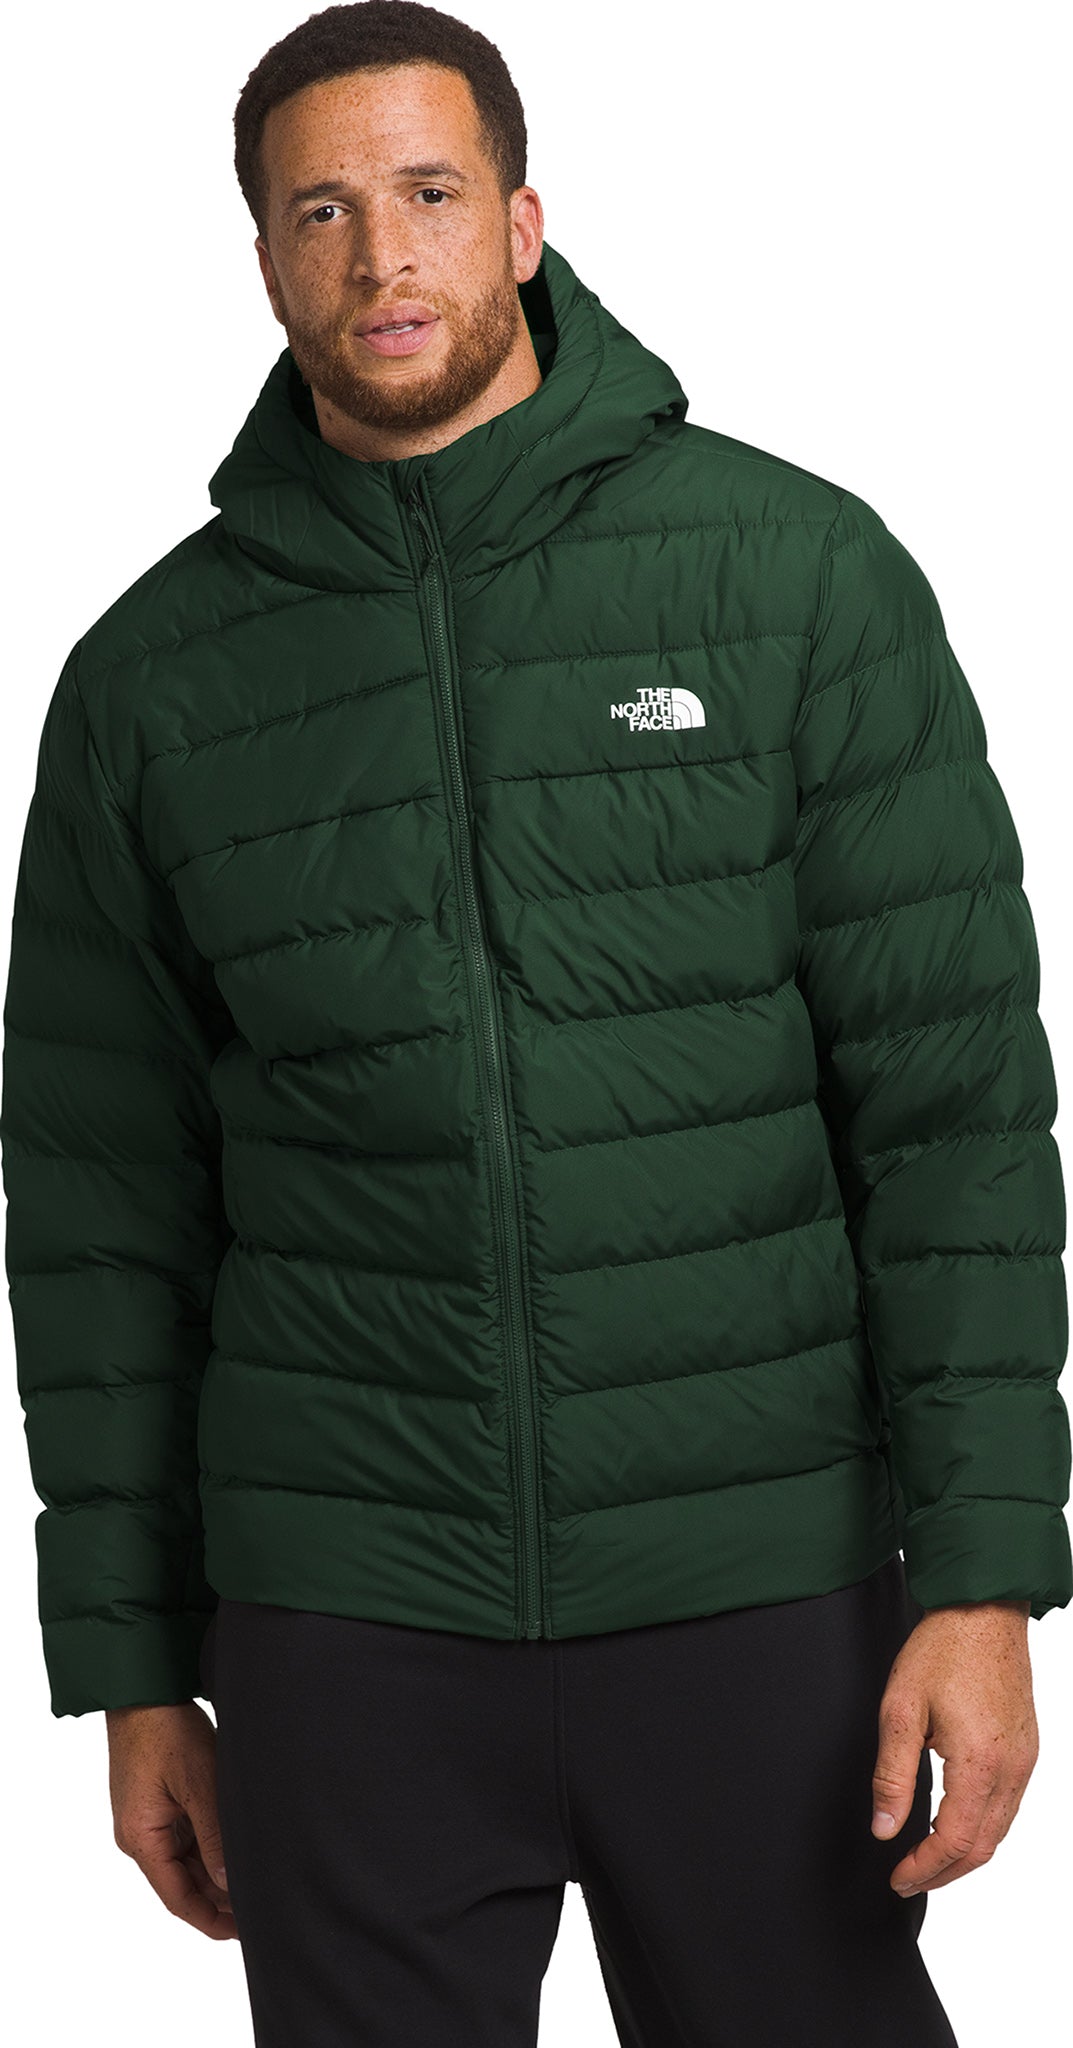 The North Face Aconcagua 3 Big Size Hoodie - Men's | Altitude Sports